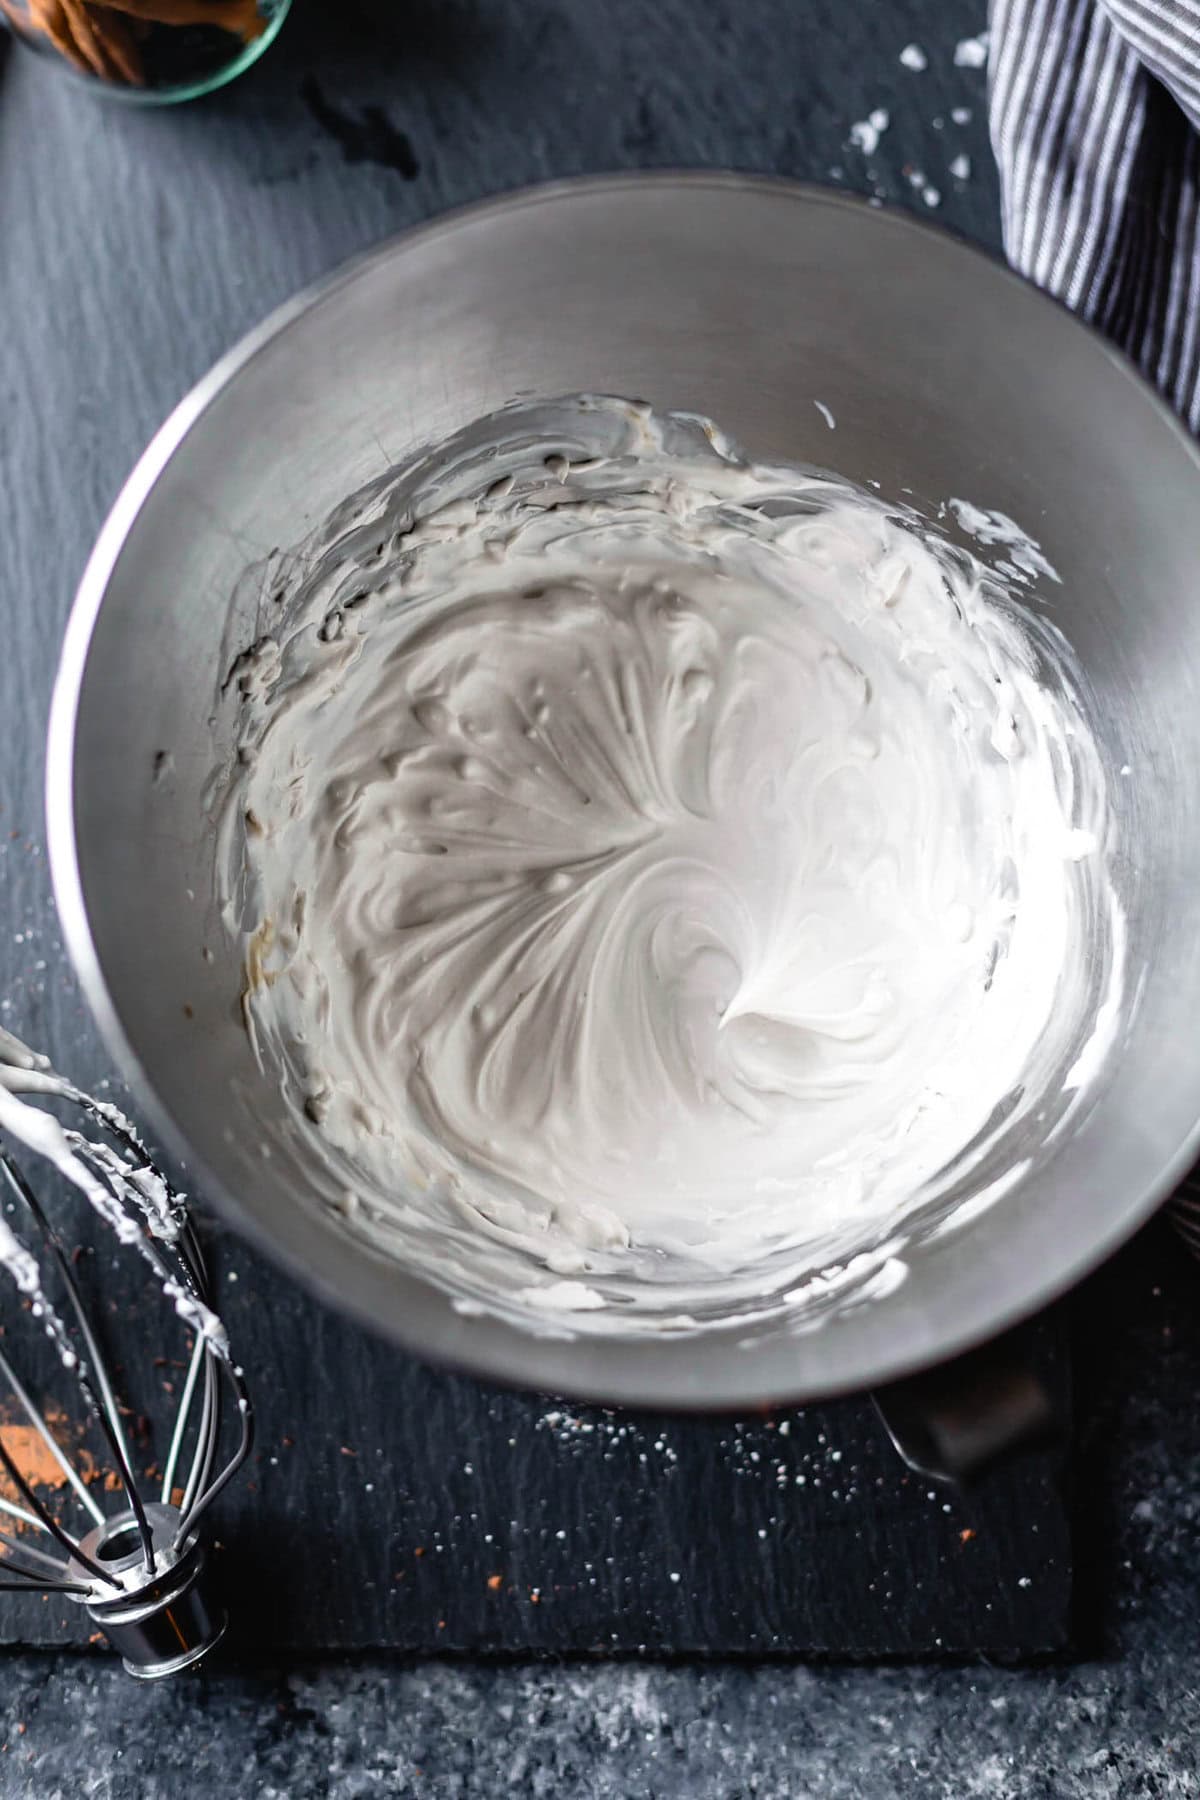 coconut cream has been whipped in the bowl of a stand mixer